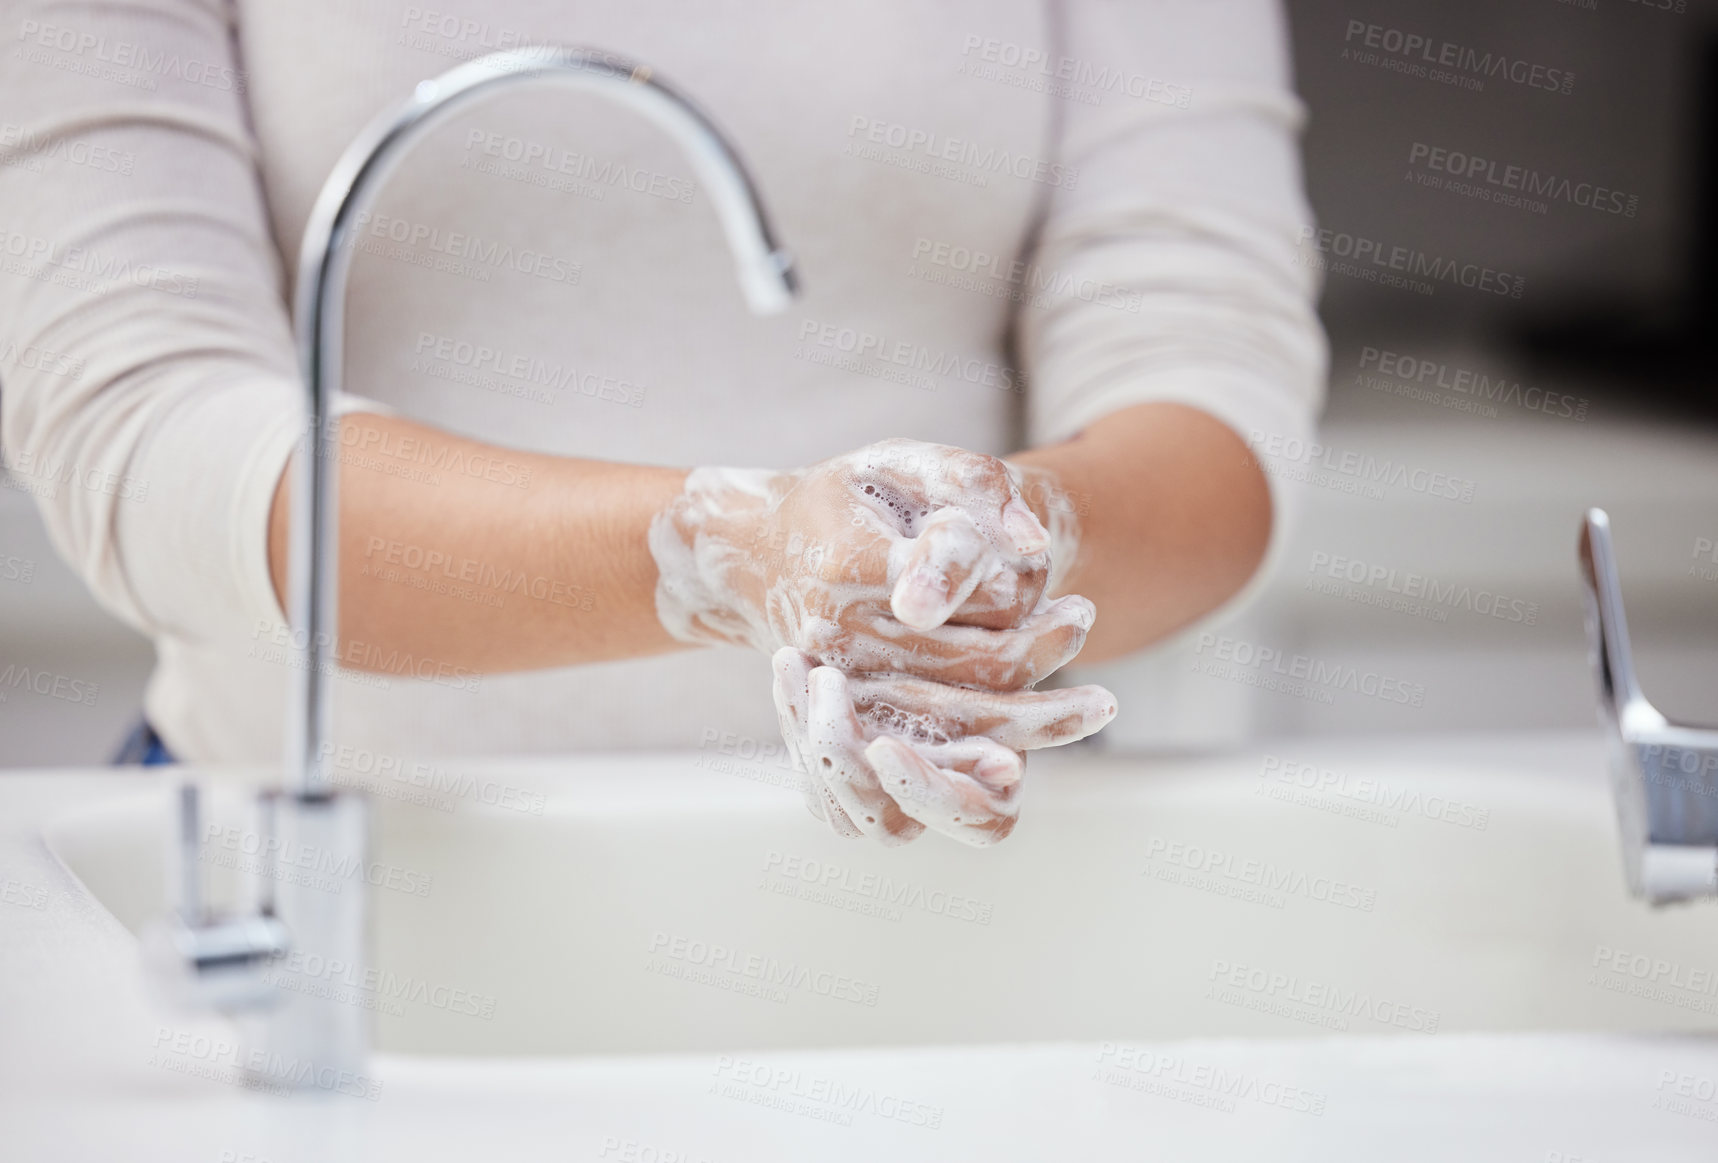 Buy stock photo Shot of an unrecognizable person washing their hands at home